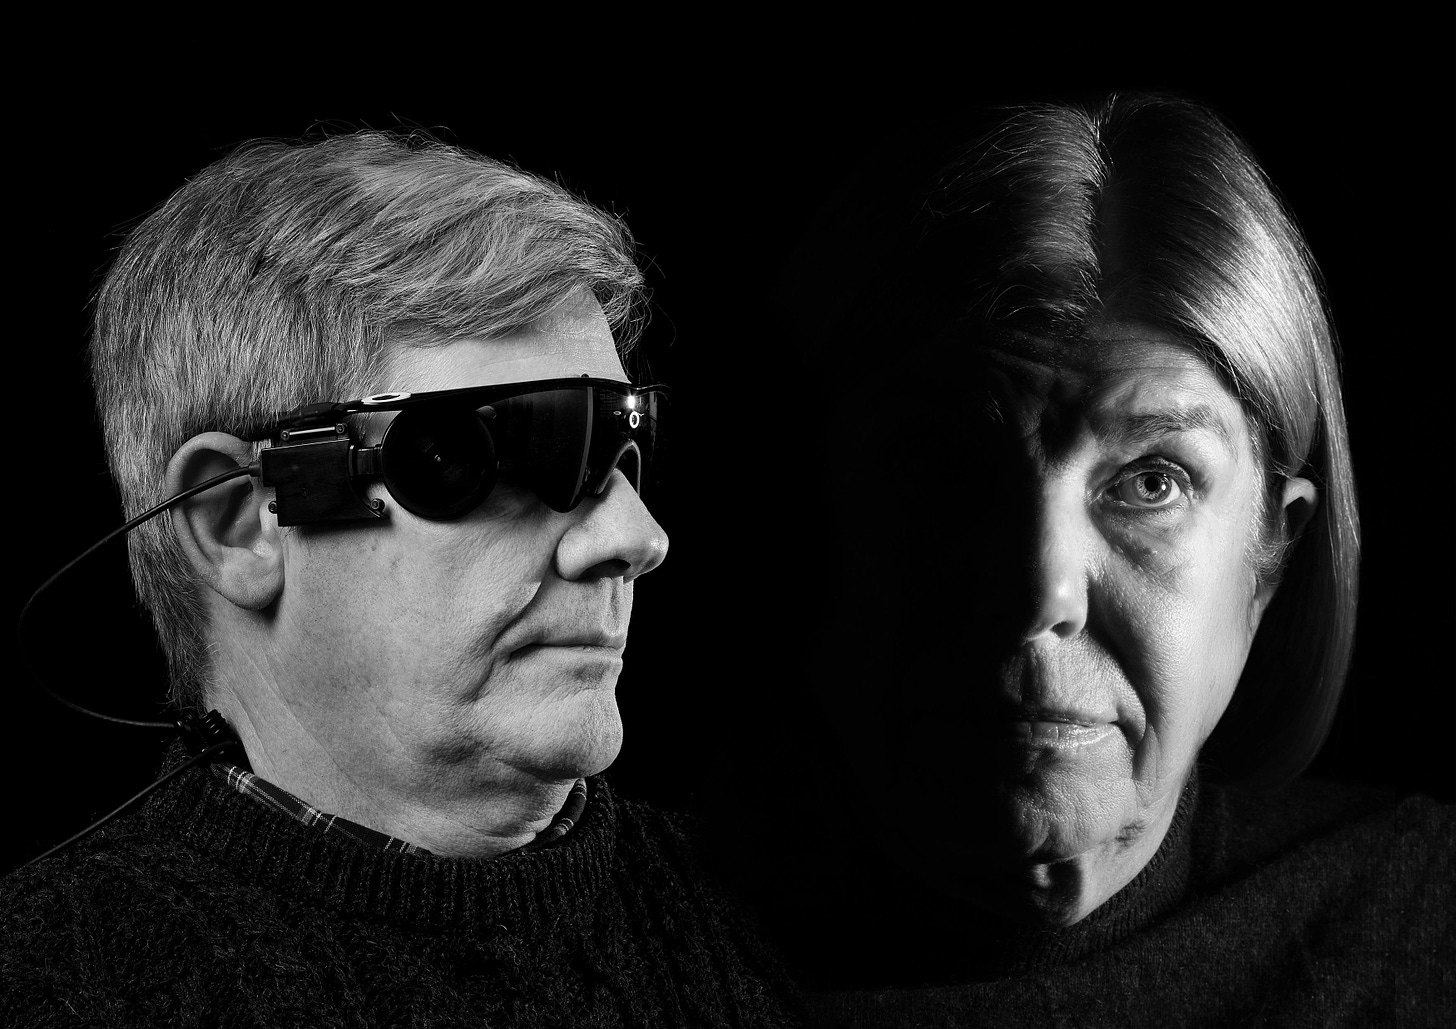 Two headshots side by side show, at left, a man wearing bulky sunglasses with a wire attached to the frame and, at right, a woman whose face is half in shadow.    Info for editor if needed: Ross Doerr and Barbara Campbell